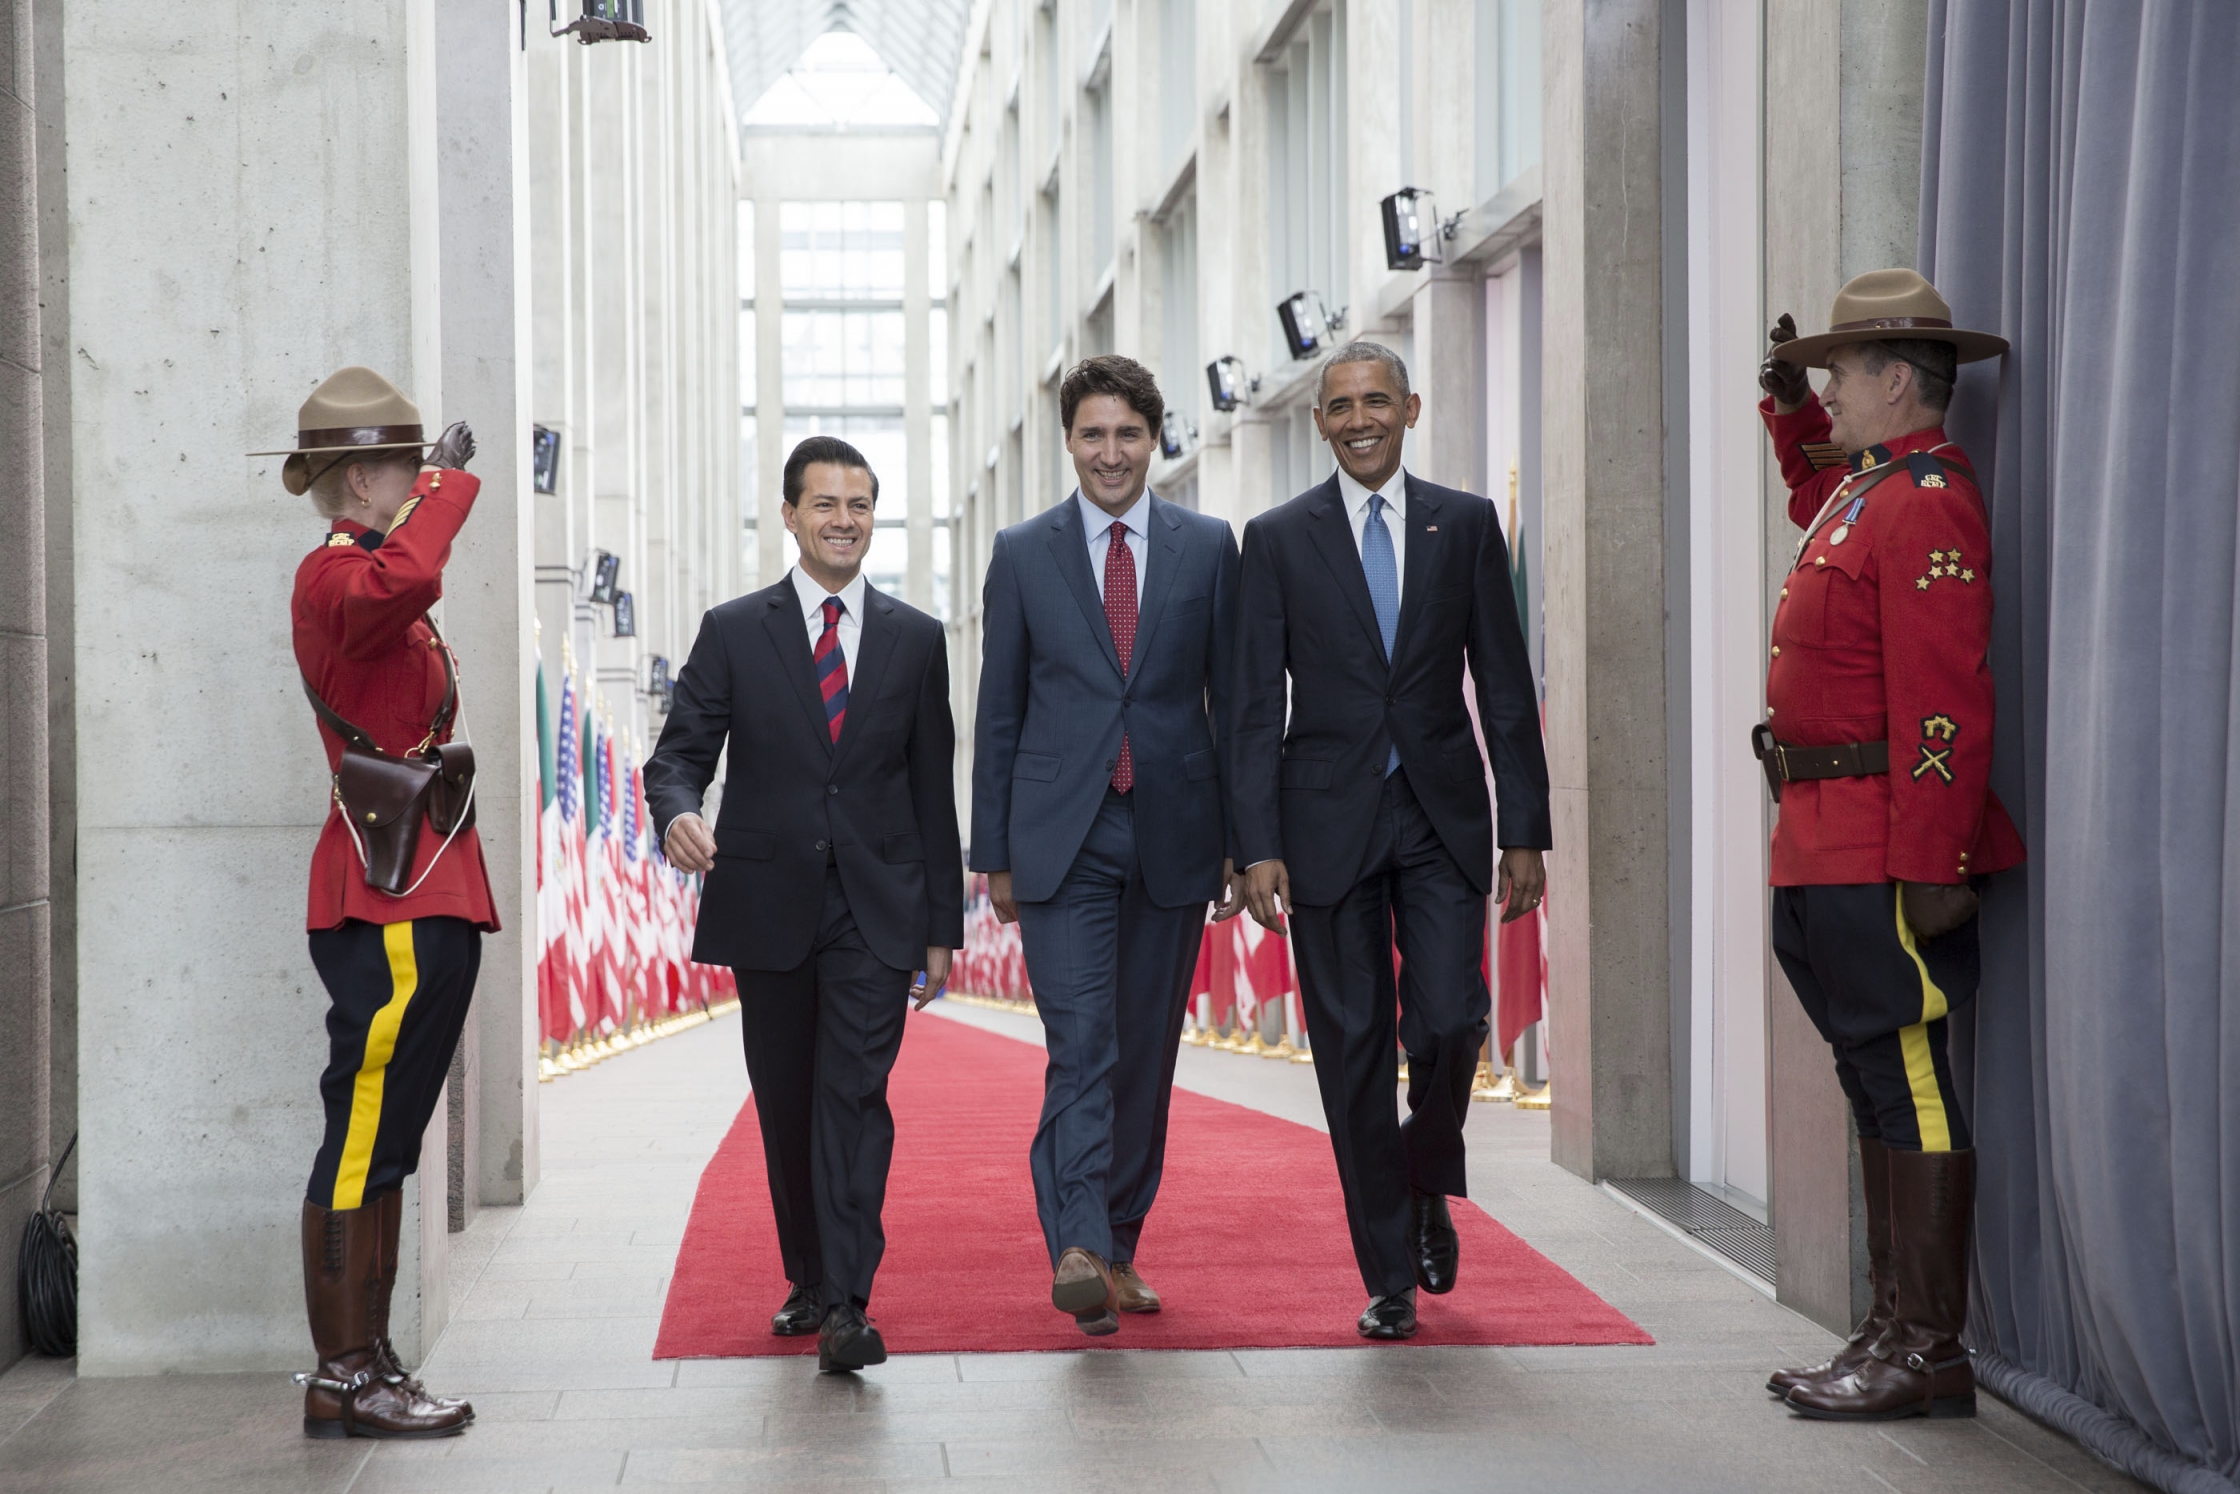 President Barack Obama and Prime Minister Justin Trudeau of Canada greet President Enrique Peña Nieto of Mexico upon arrival for the North American Leaders' Summit at the National Gallery of Canada in Ottawa, Canada, June 29, 2016. (Official White House Photo by Lawrence Jackson)